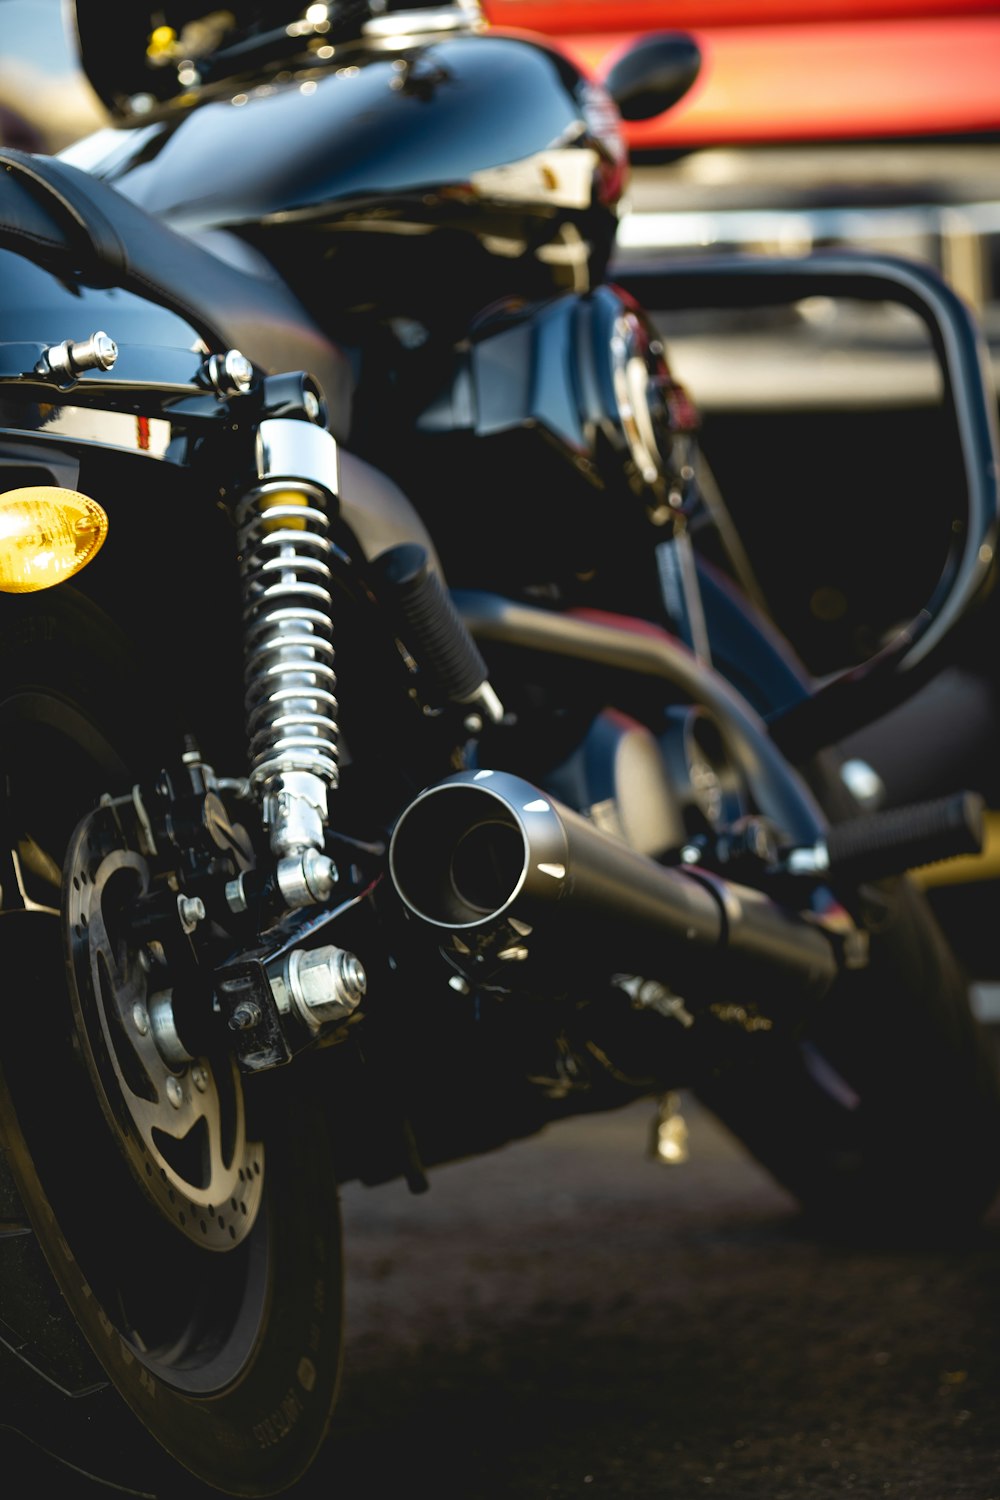 a close up of a motorcycle parked in a parking lot